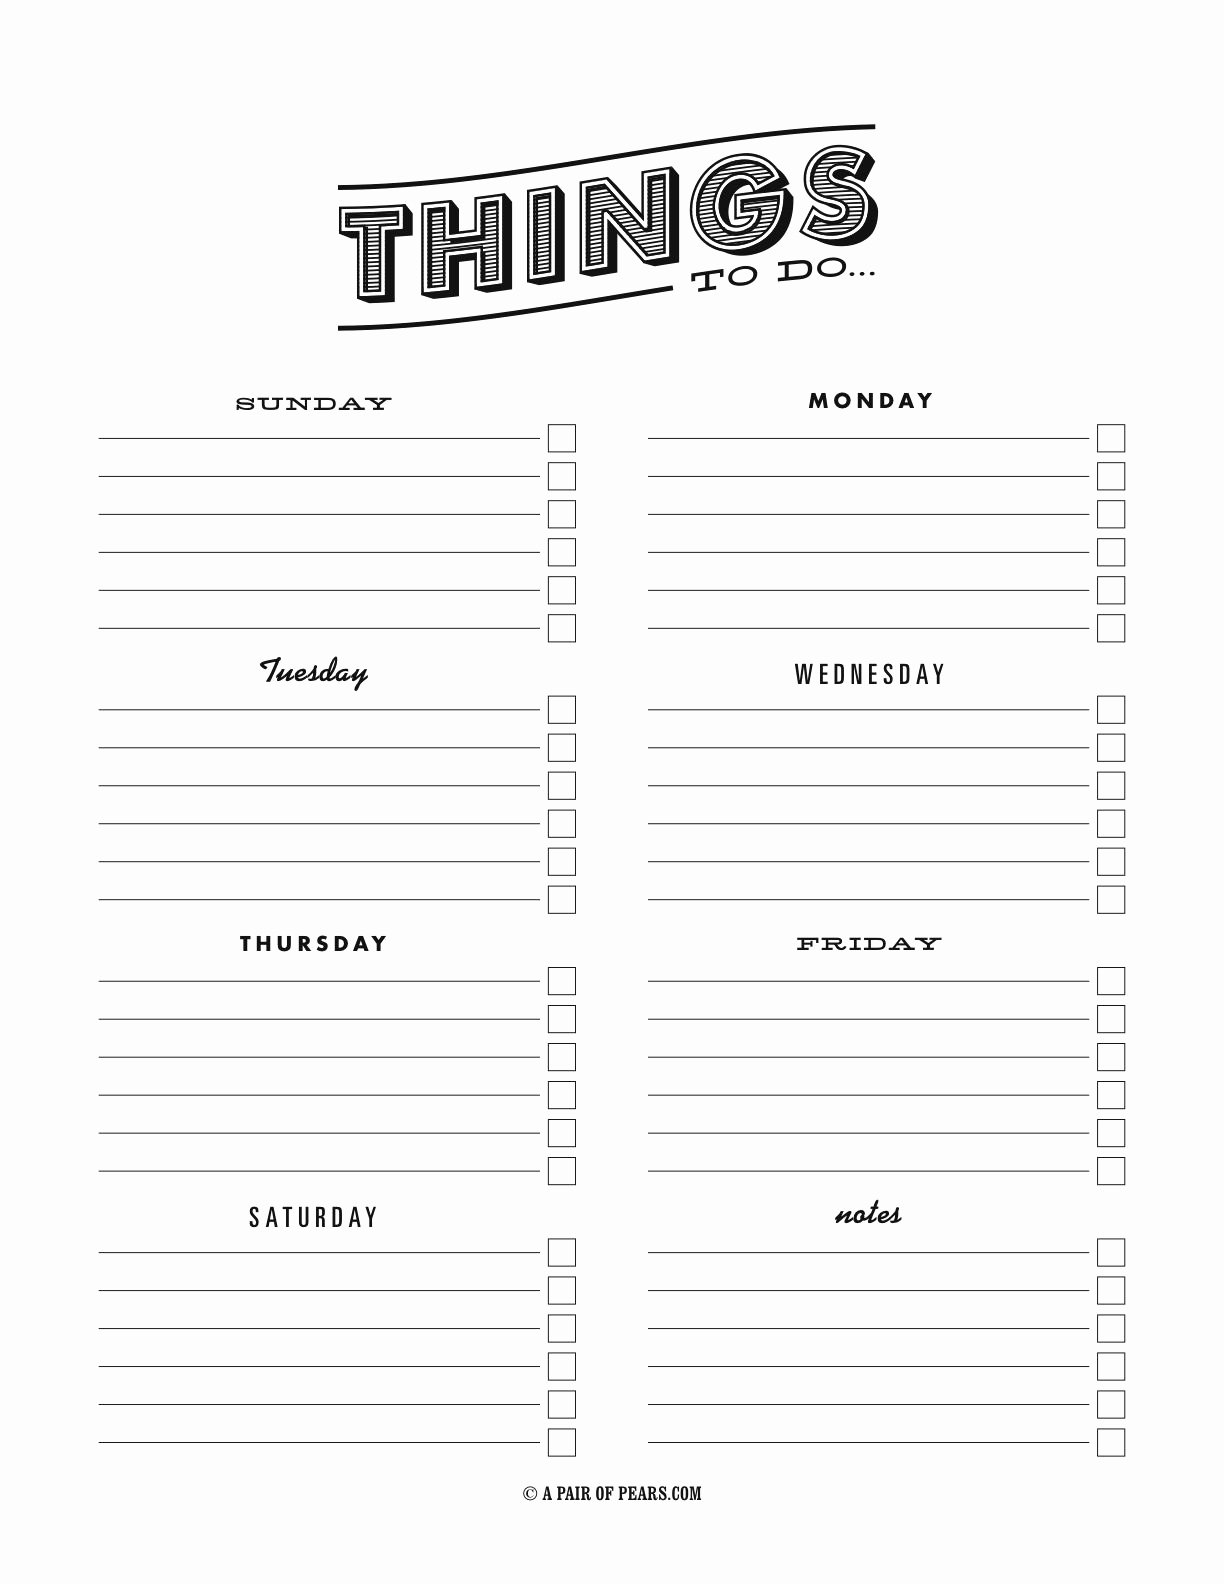 Things to Do List Template New Things to Do Template Pdf Fancy to Do List